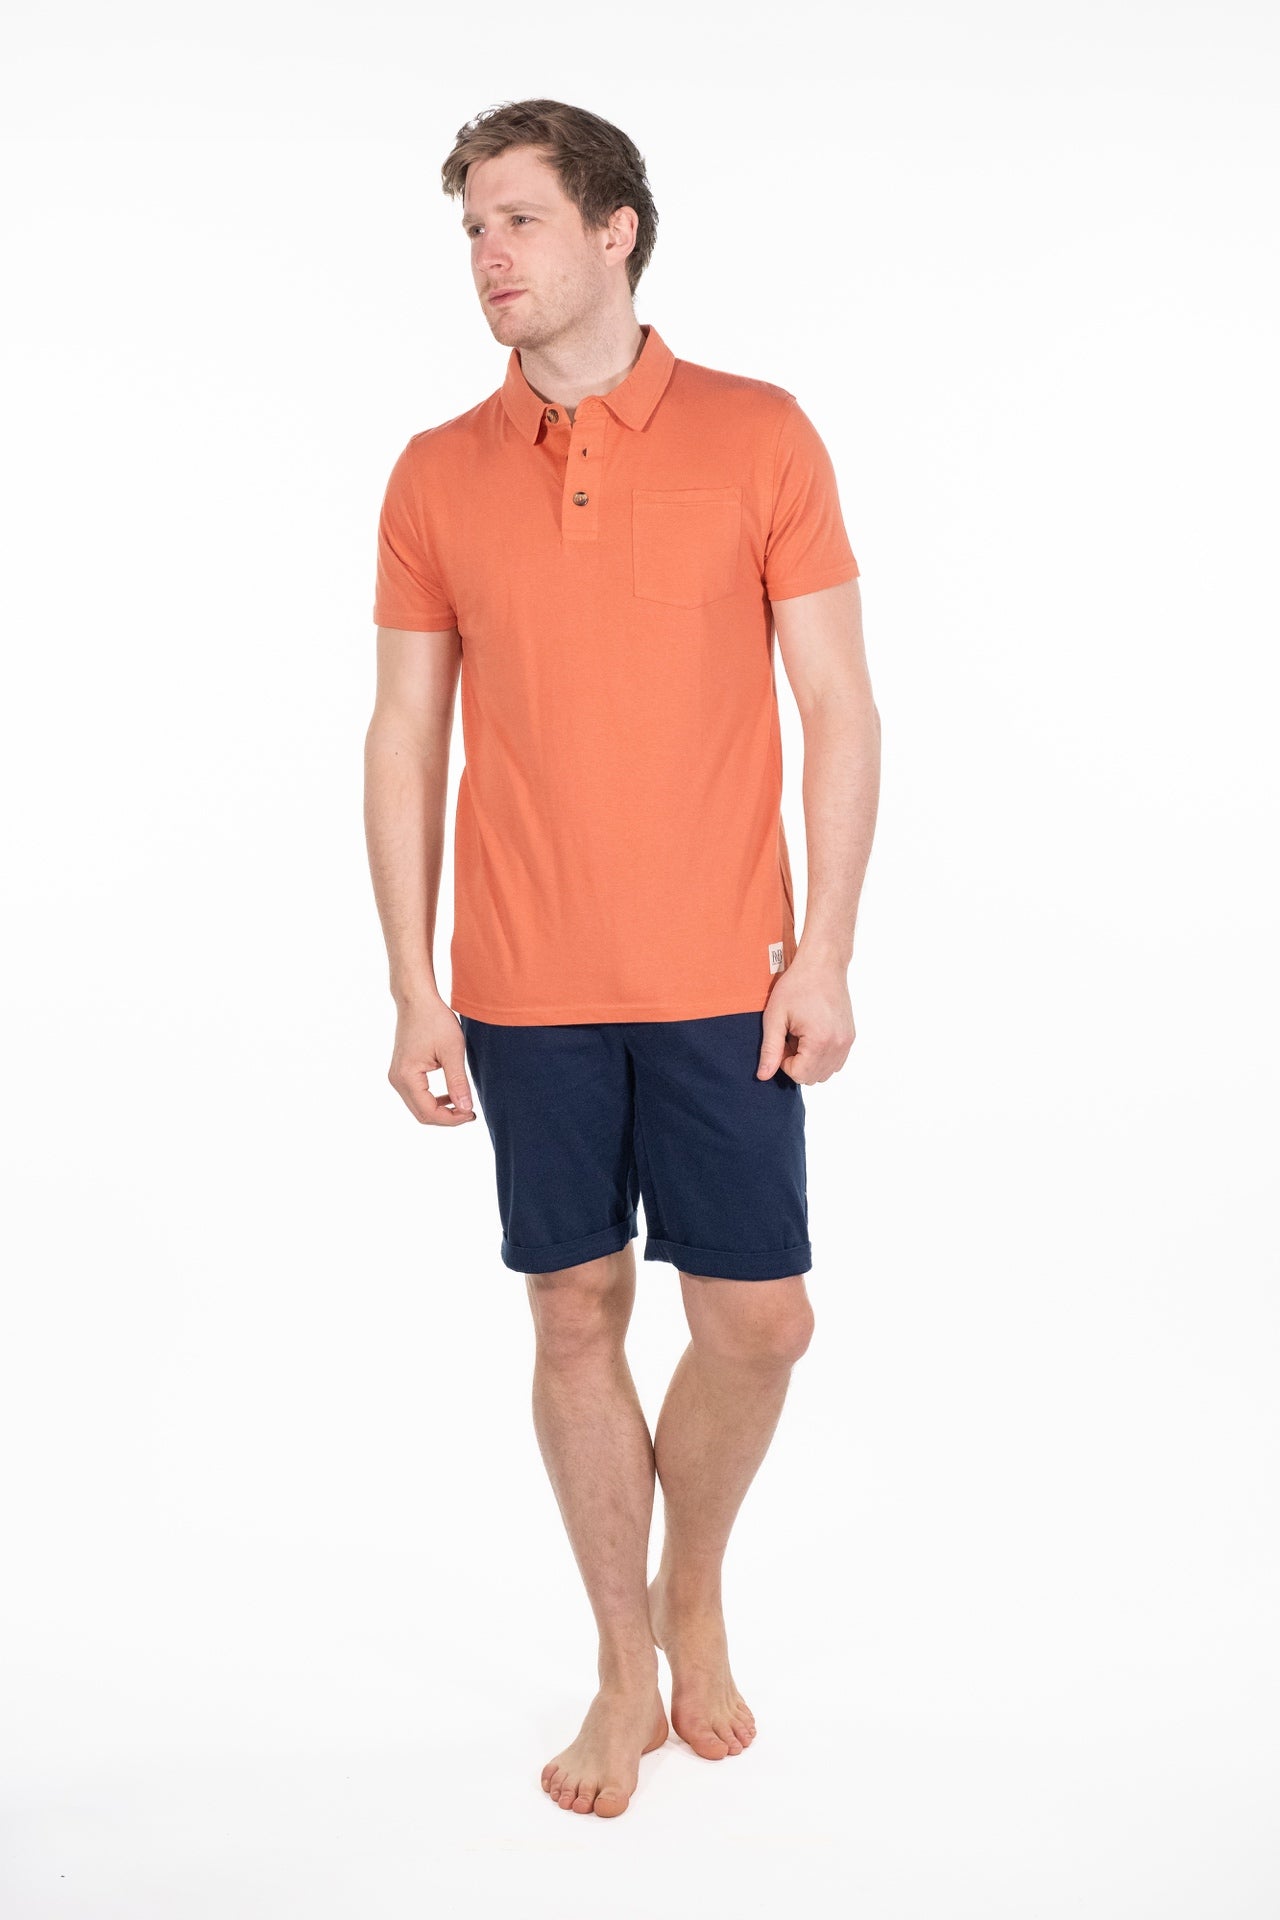 Theo Red Jersey Polo - Rupert and Buckley - Polo Shirt